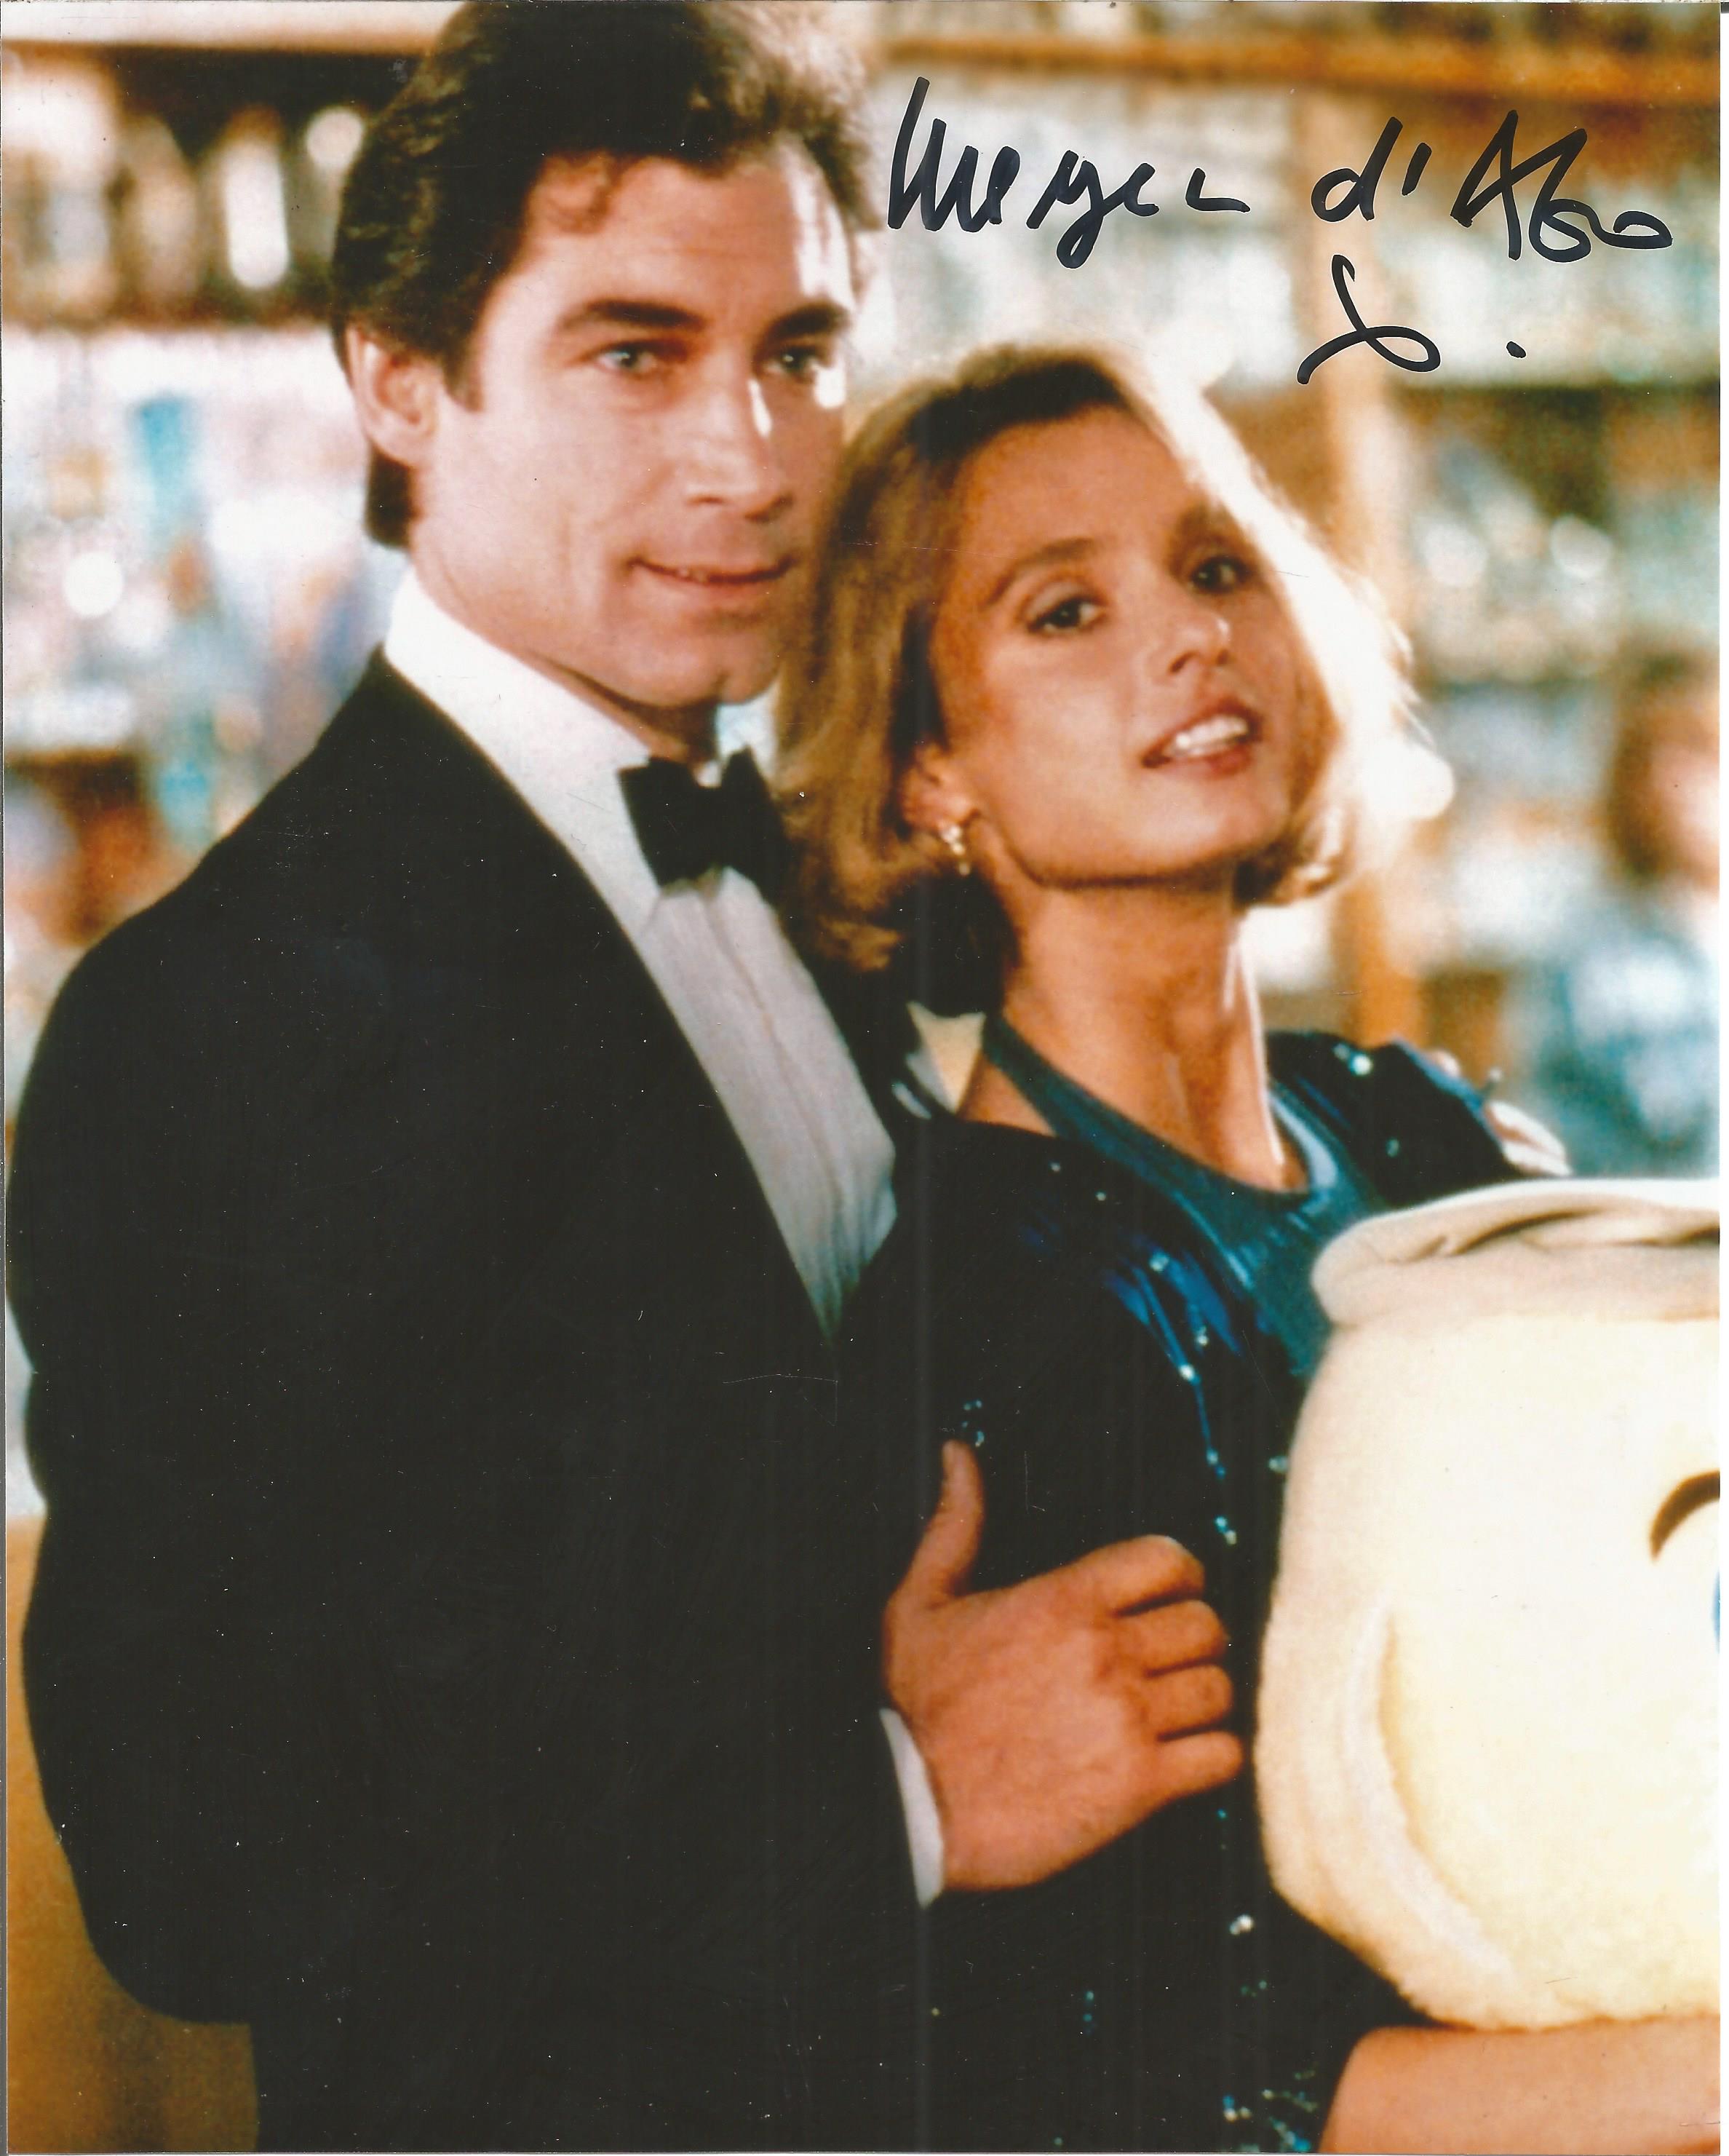 Maryam D'Abo as Kara Milovic in 'The living daylights'. All autographs come with a Certificate of